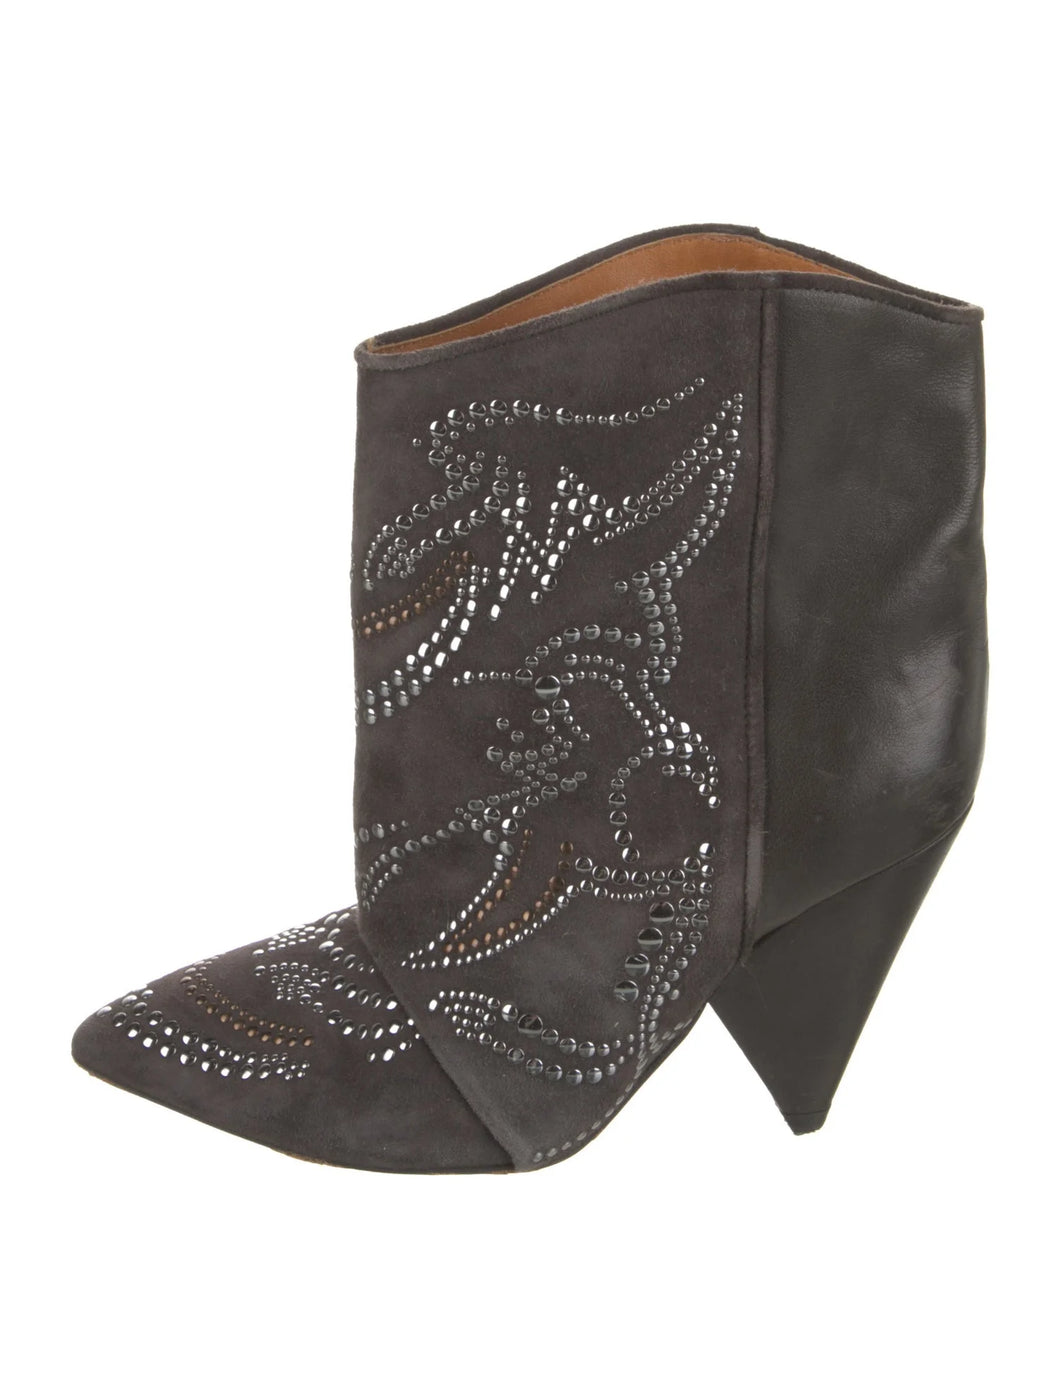 ISABEL MARANT
Suede Studded Accents Western Boots 37